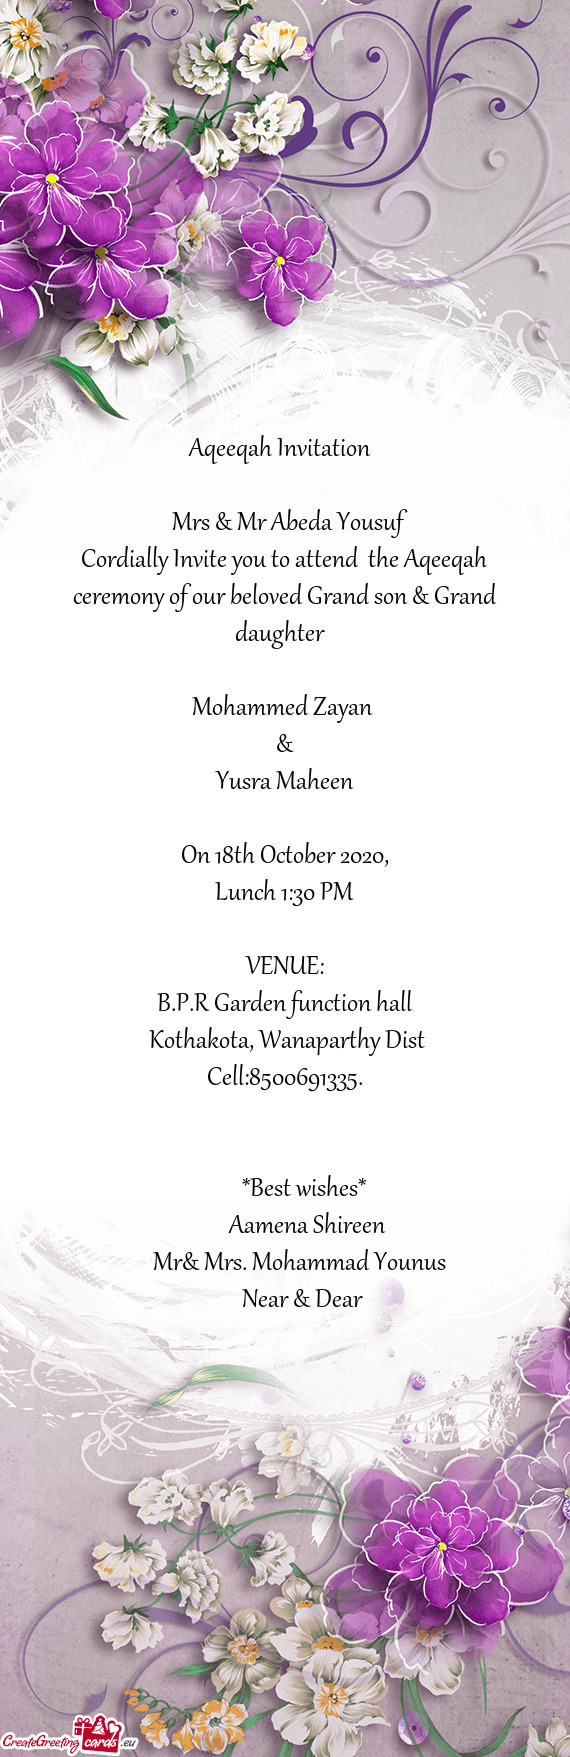 Cordially Invite you to attend the Aqeeqah ceremony of our beloved Grand son & Grand daughter